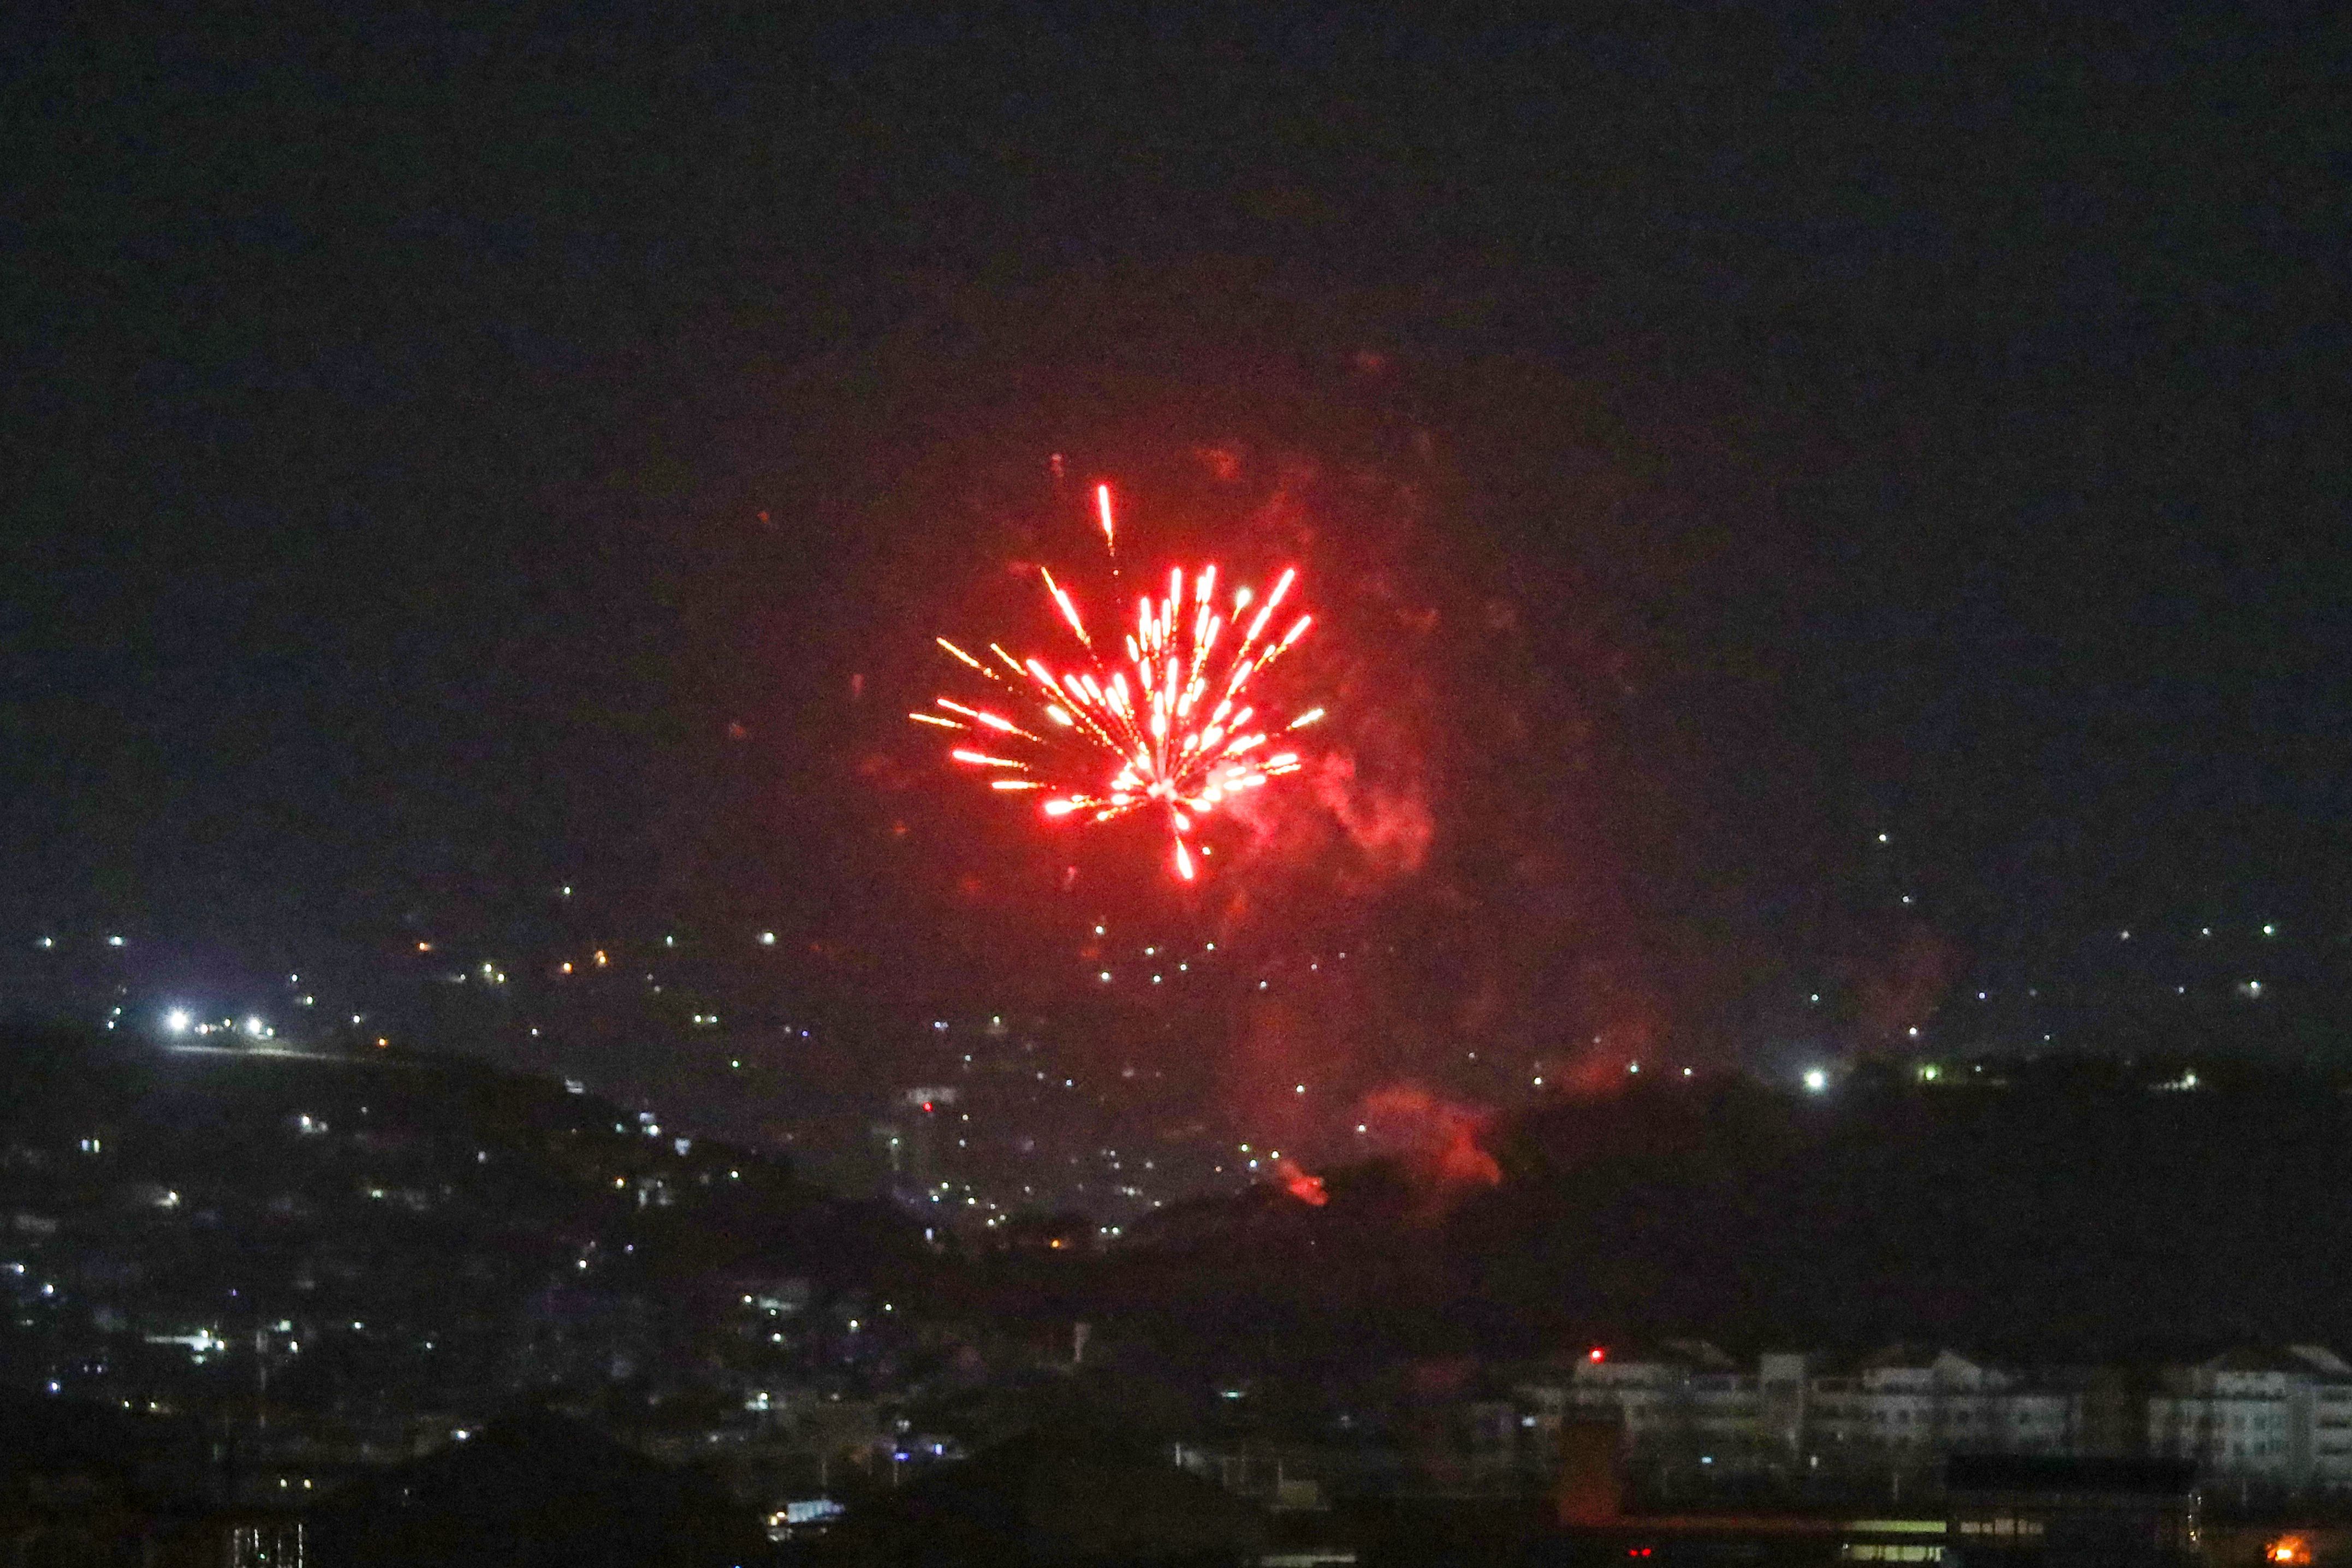 Fireworks light up part of the night sky after the last US aircraft took off from the airport in Kabul early on August 31